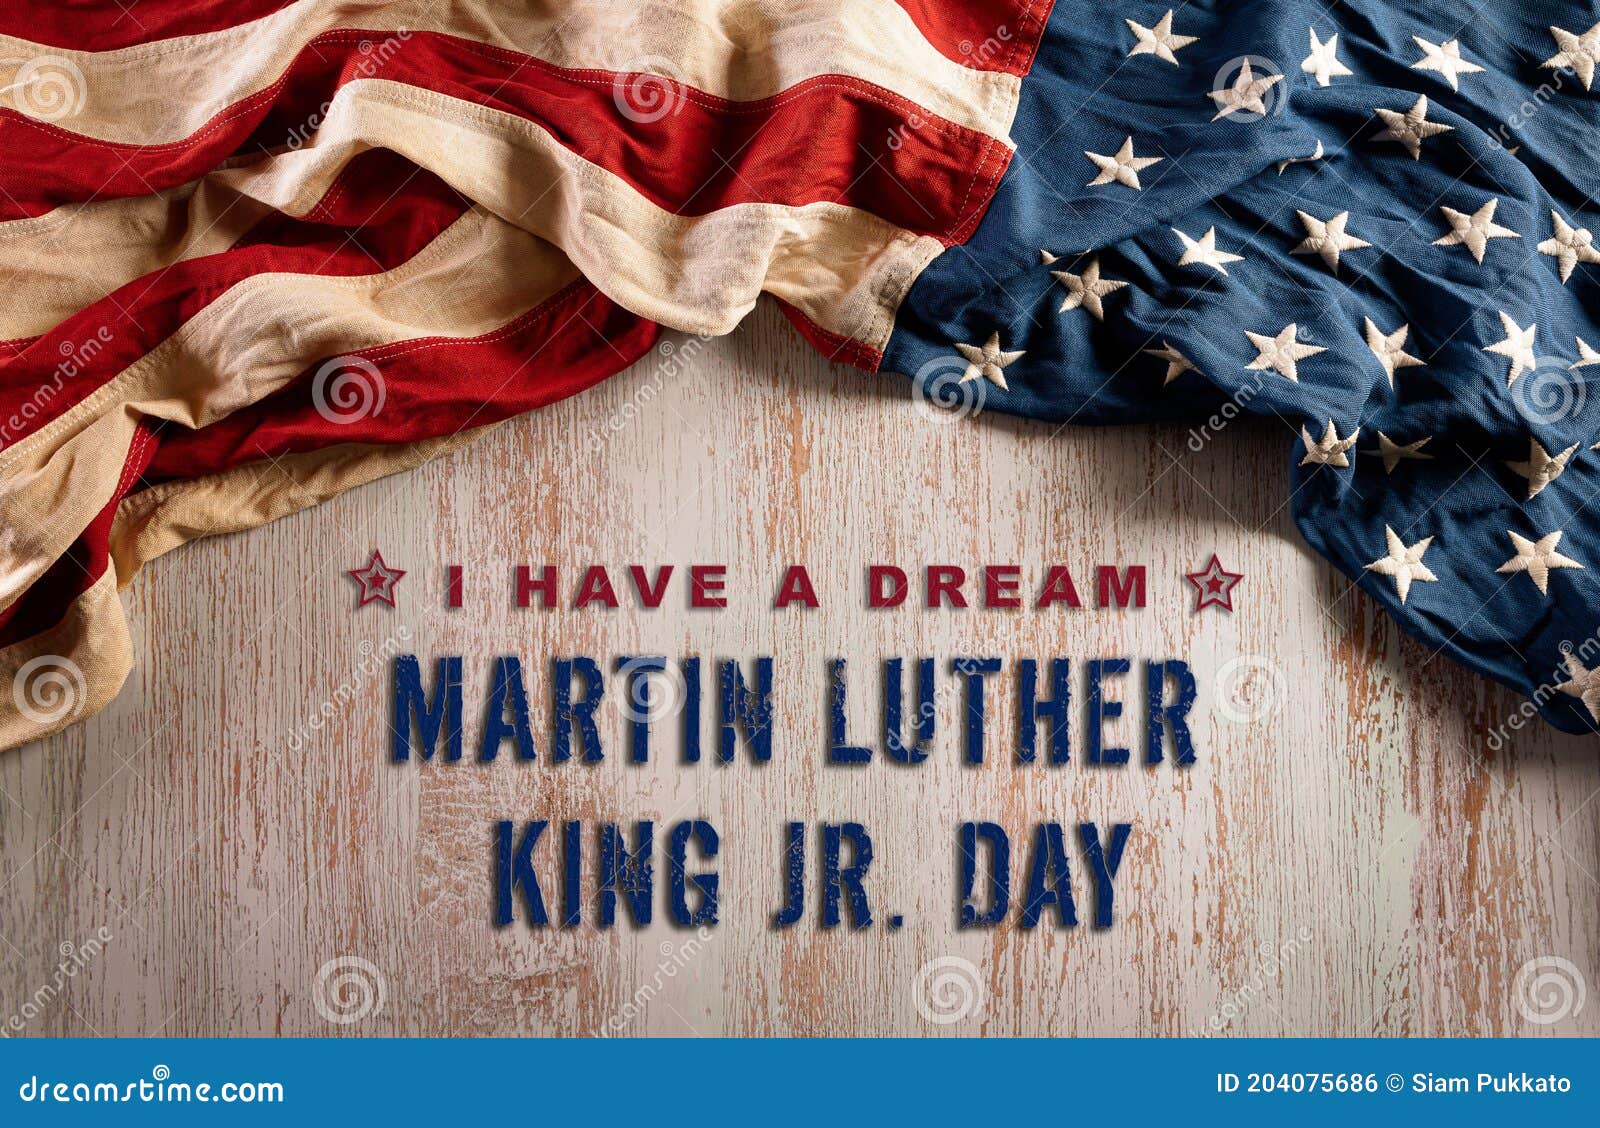 happy martin luther king day concept.  american flag againt old wooden background